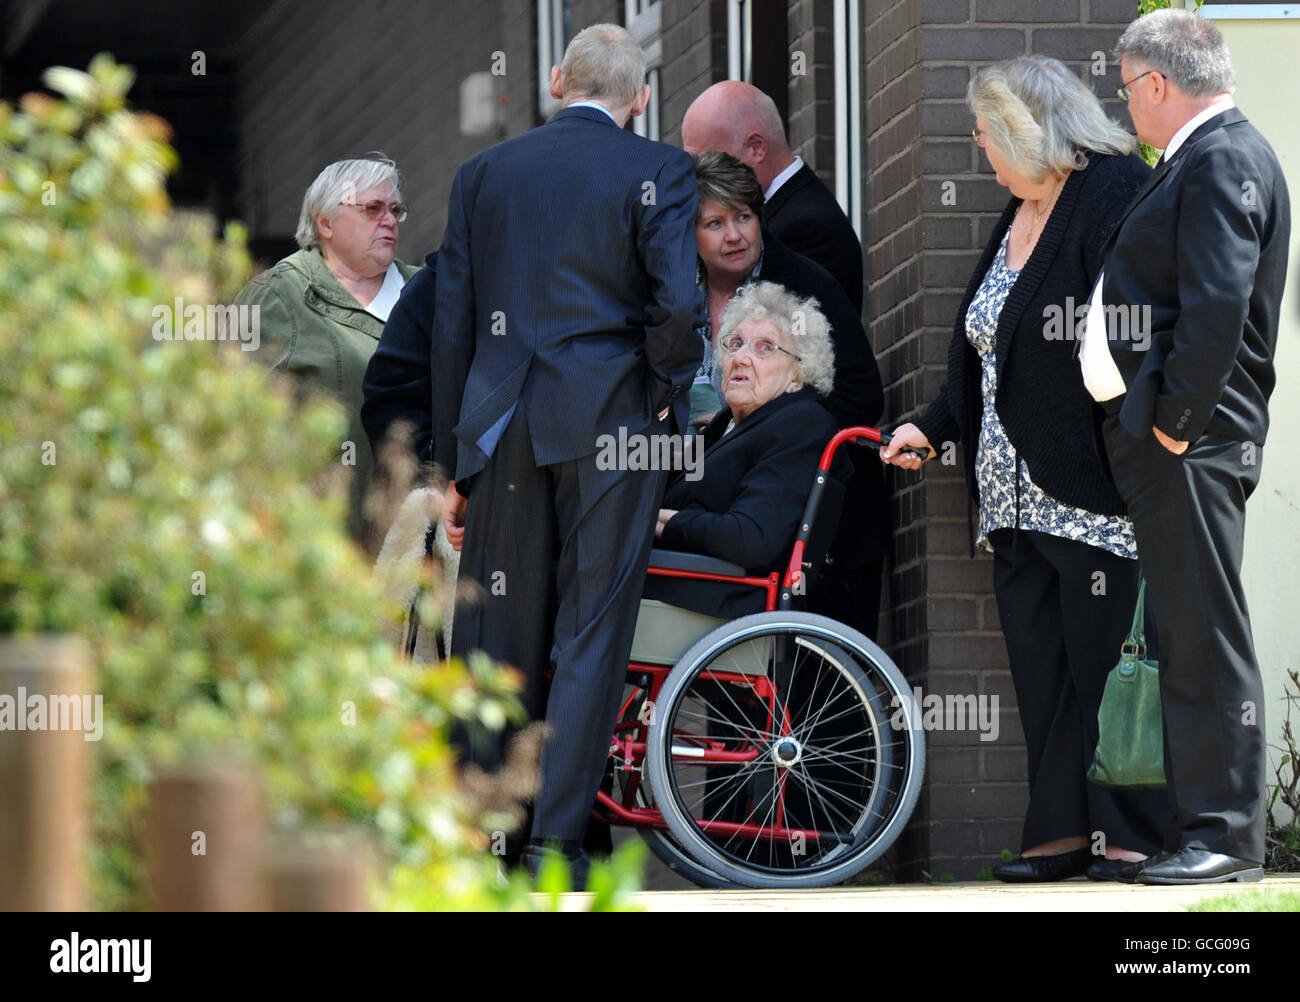 Rose (centre), the mother of David Askew after his funeral at St Barnabas Church, Hattersley, Greater Manchester. Stock Photo